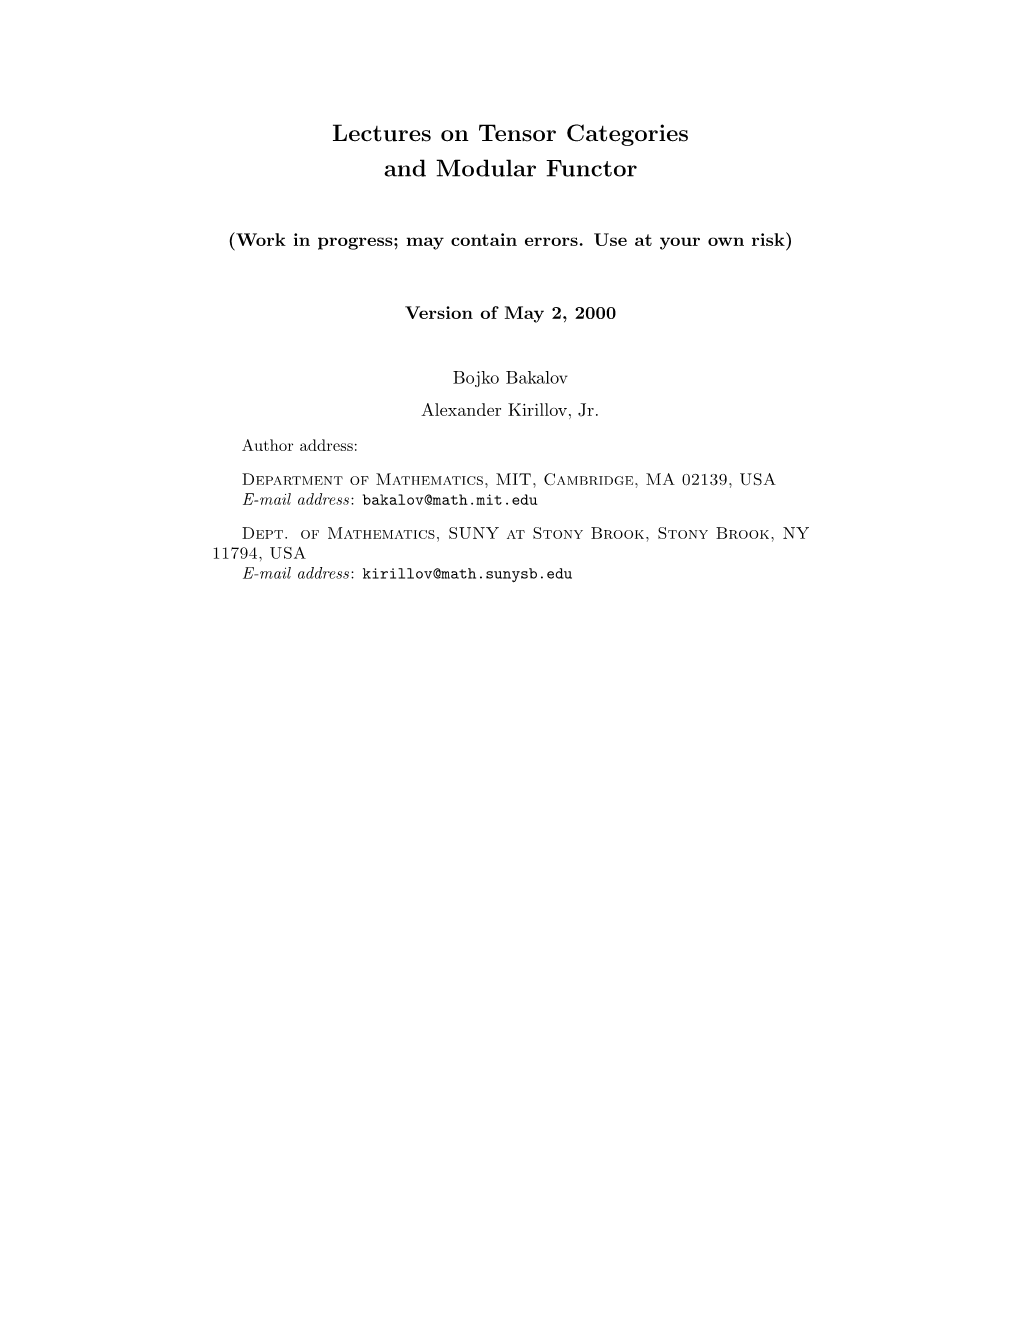 Lectures on Tensor Categories and Modular Functor